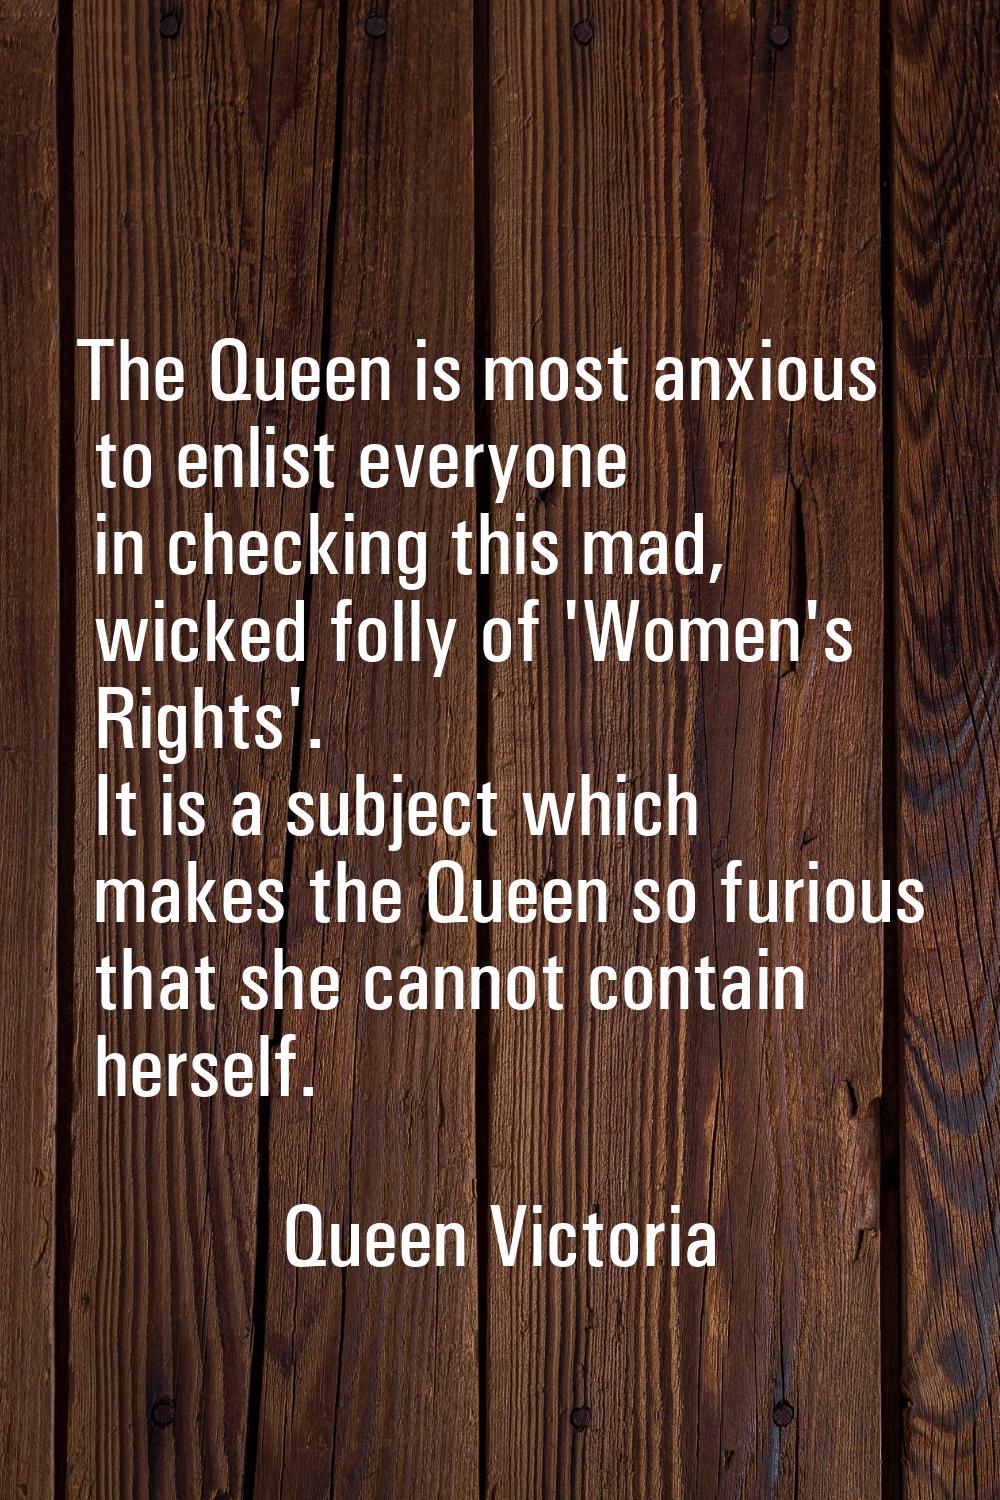 The Queen is most anxious to enlist everyone in checking this mad, wicked folly of 'Women's Rights'